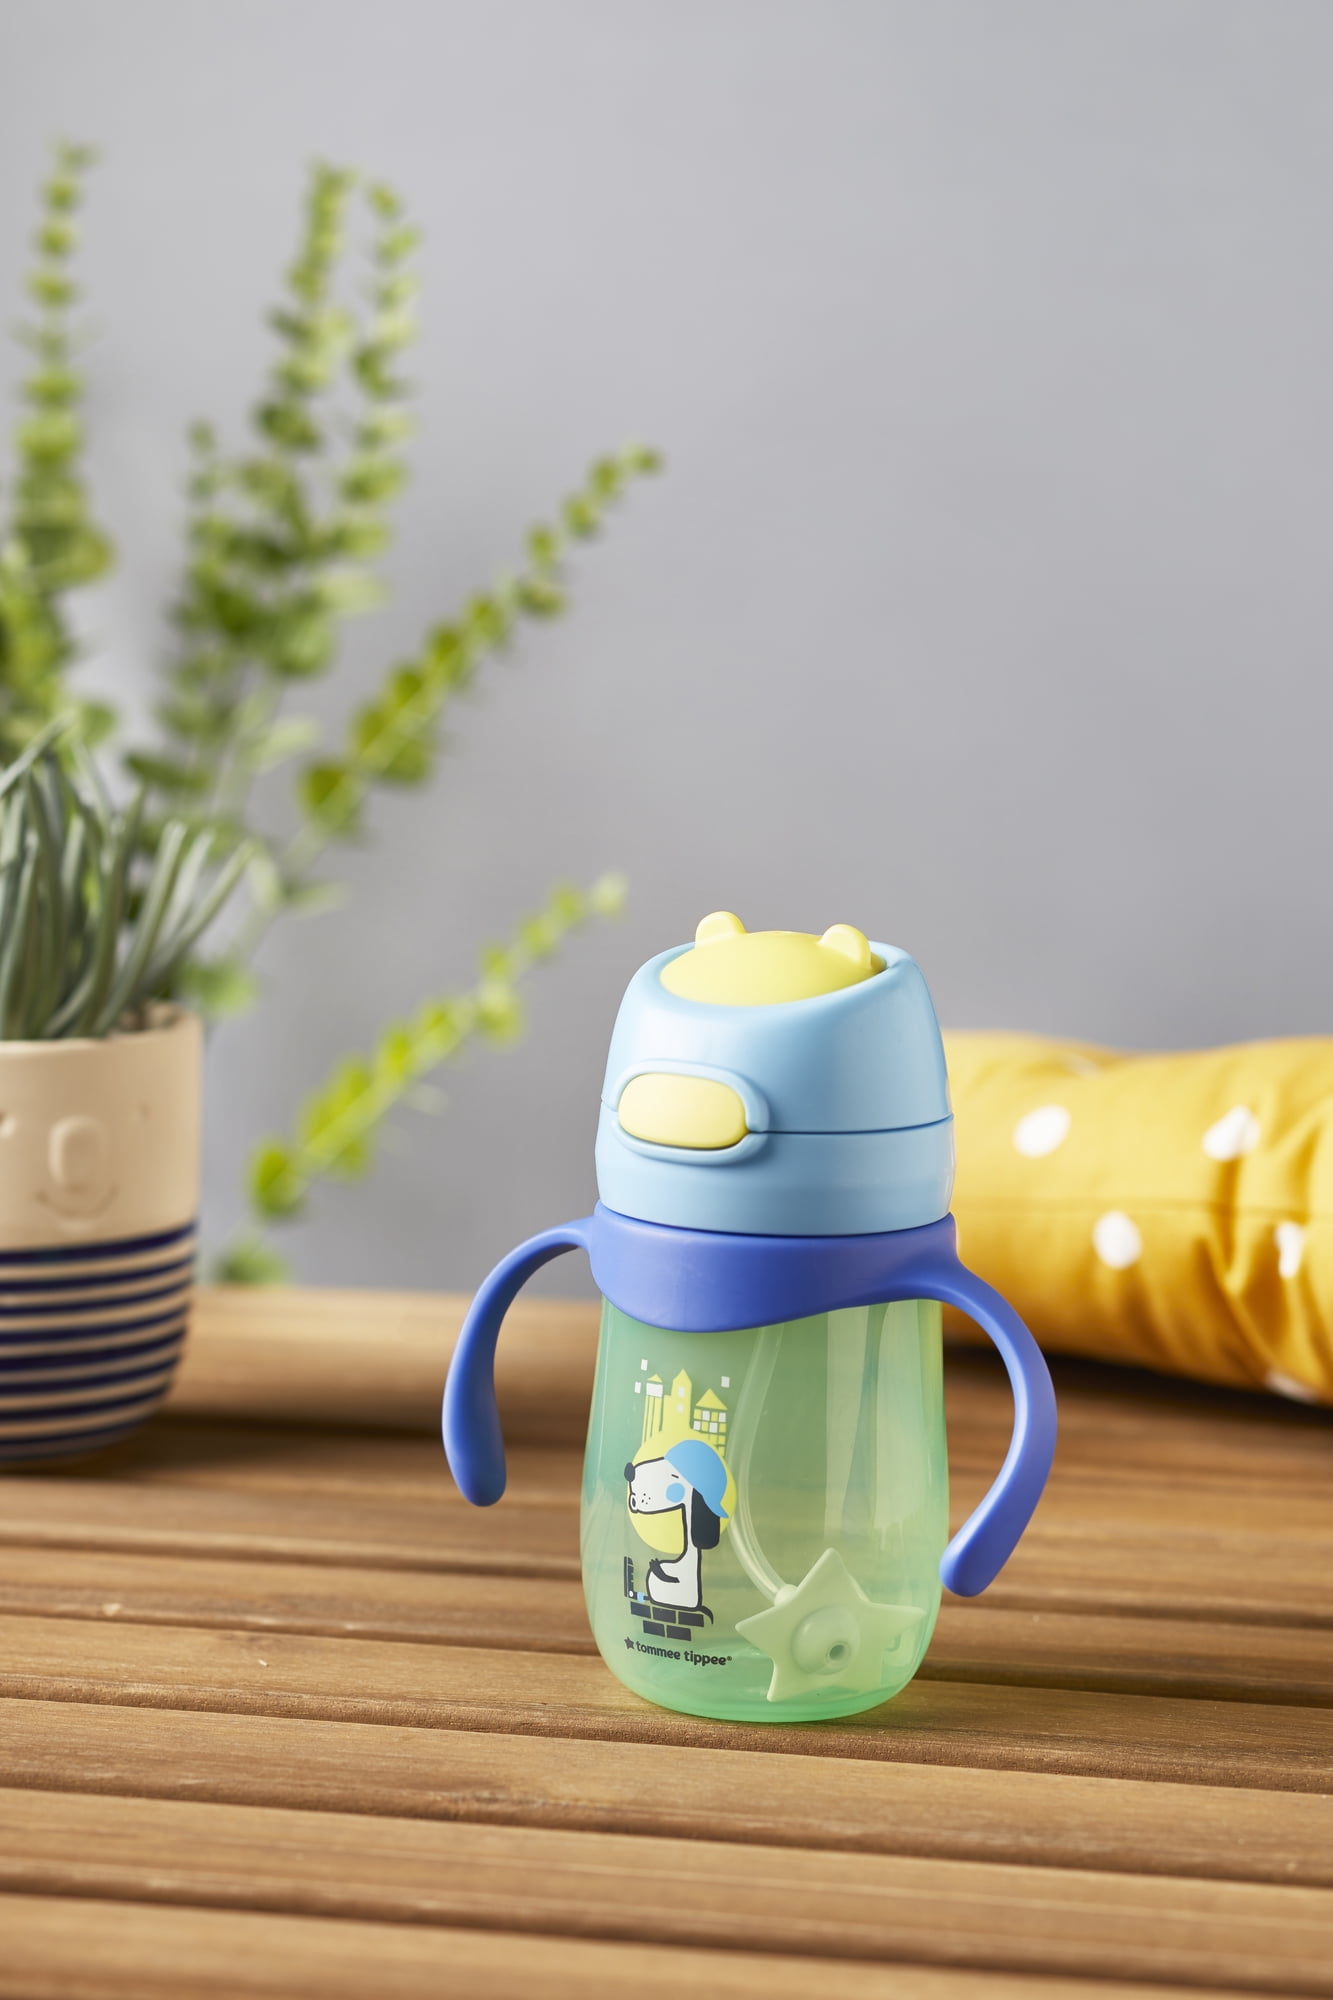 Tommee Tippee Weighted Straw Cup 240ml